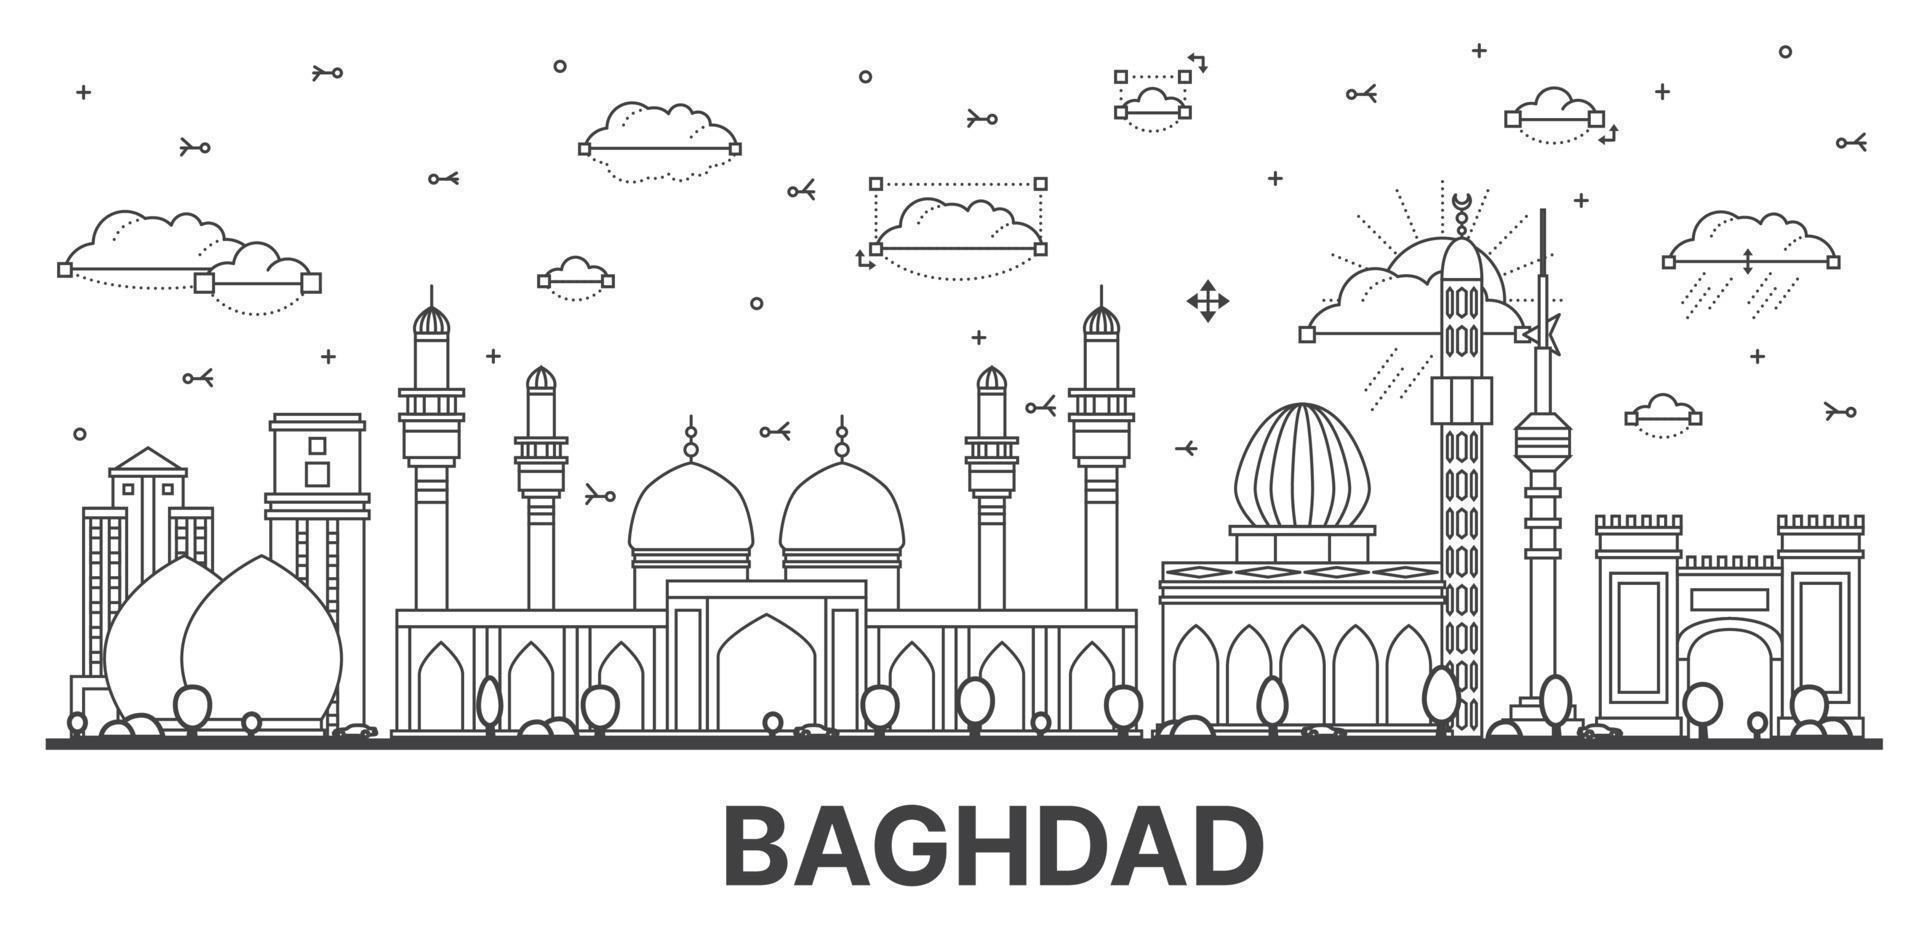 Outline Baghdad Iraq City Skyline with Historic Buildings Isolated on White. Vector Illustration.